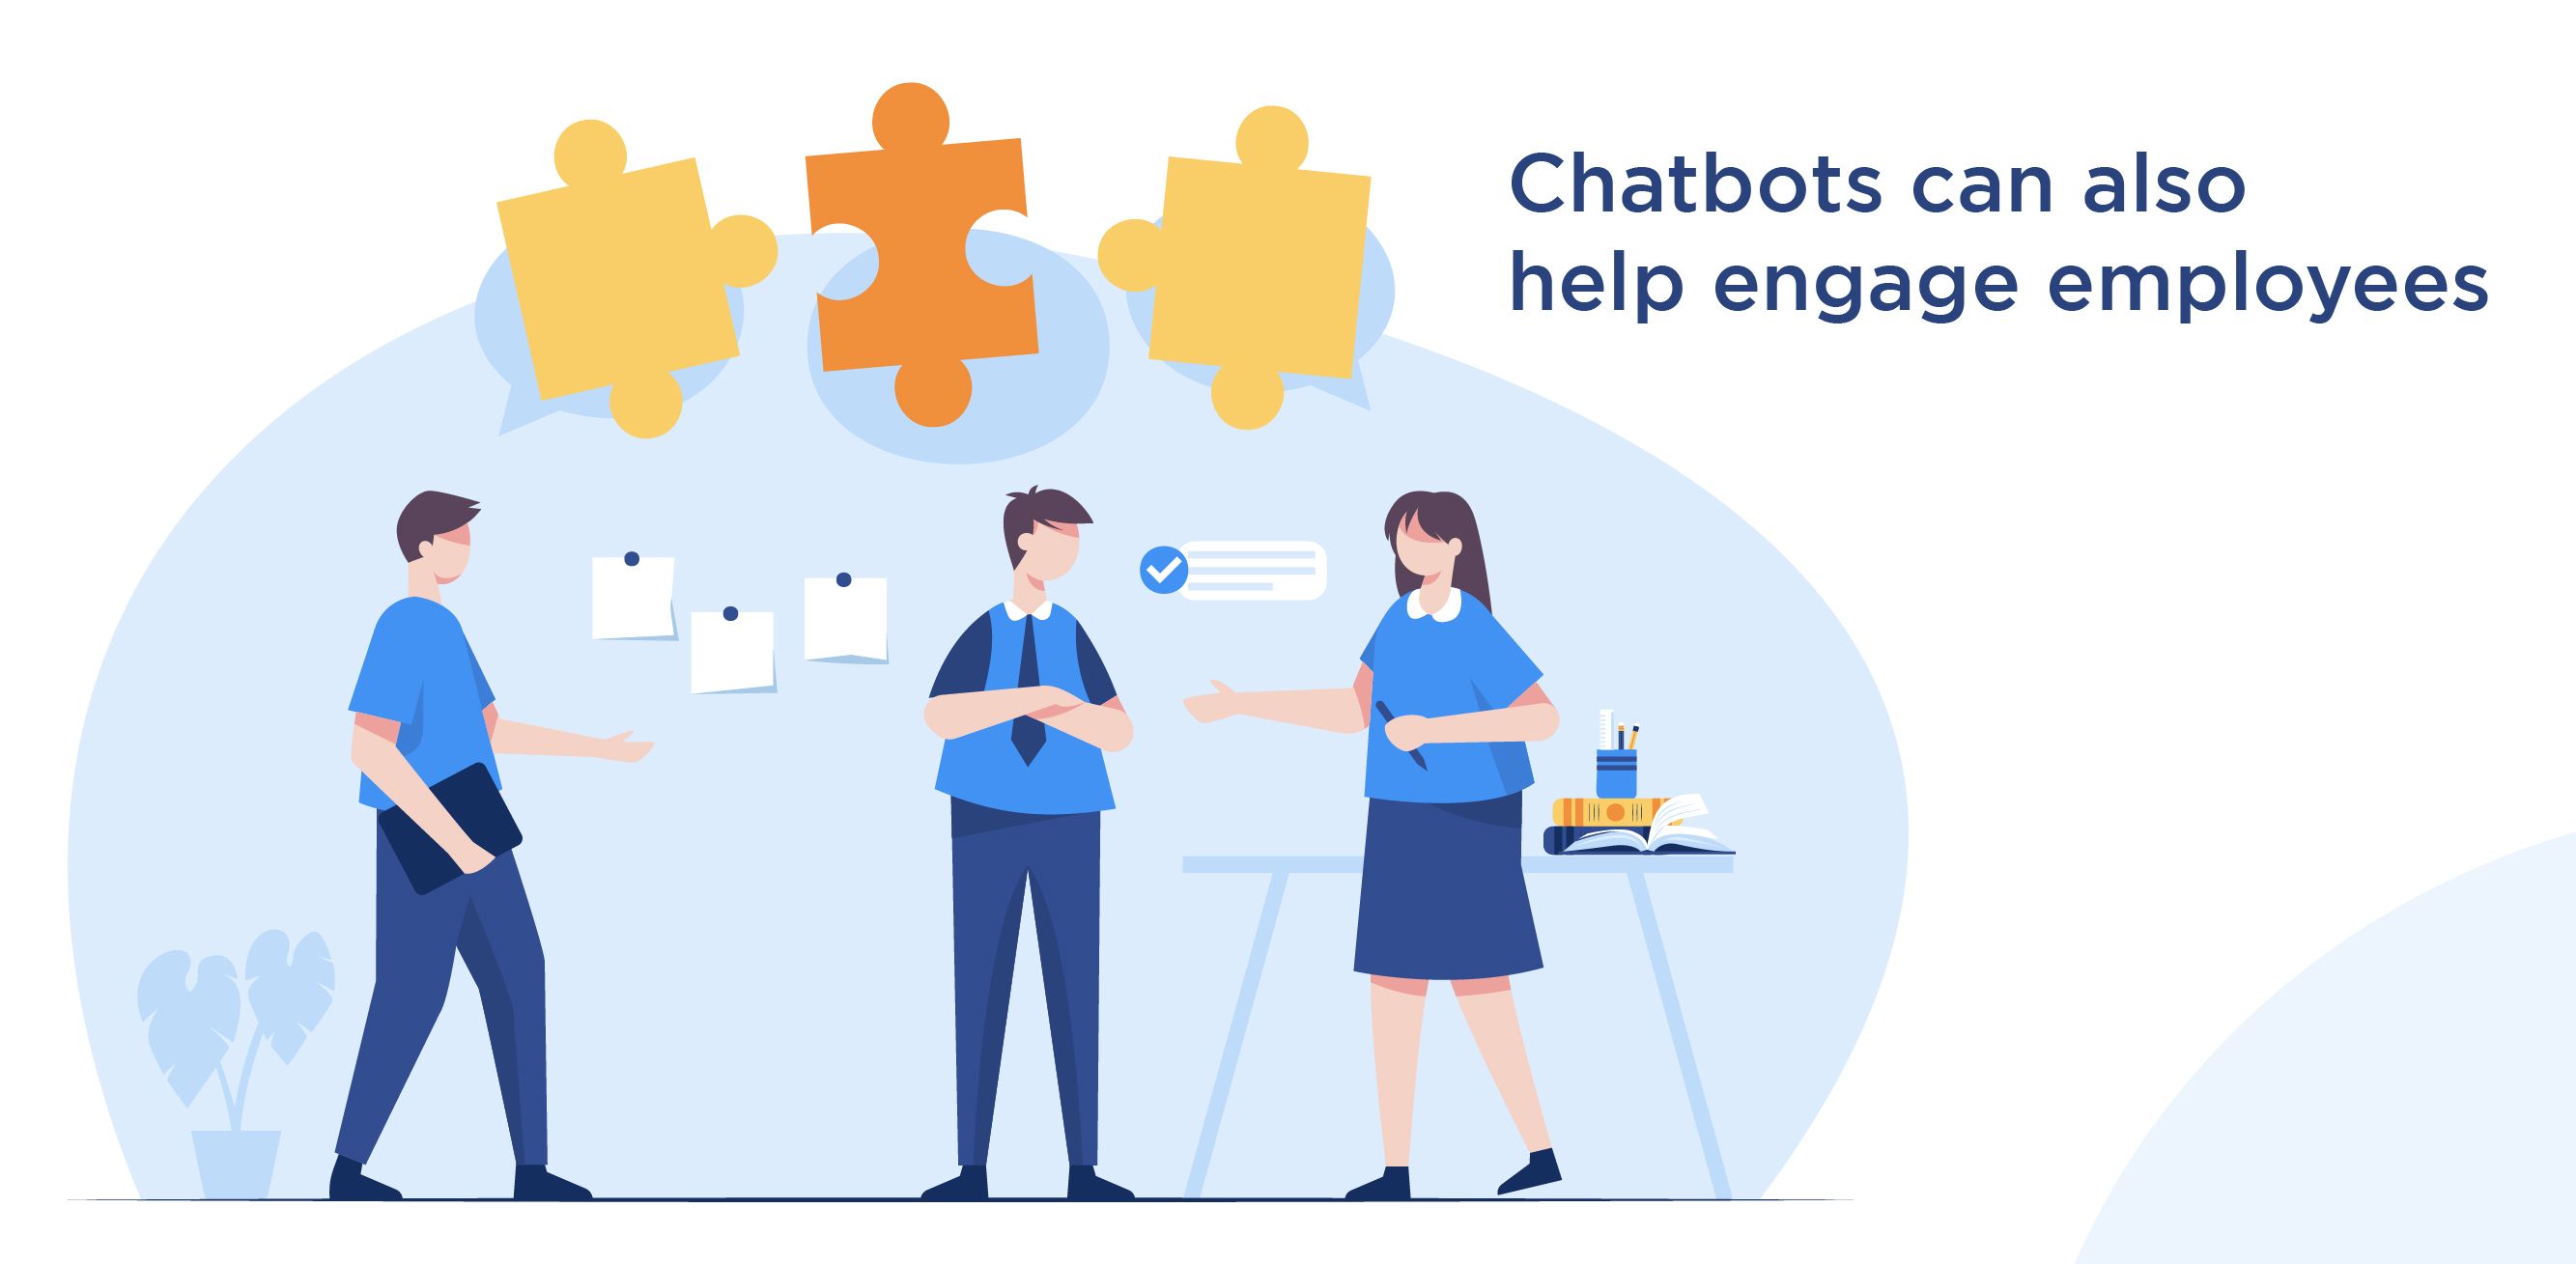 Chatbots can also help engage employees